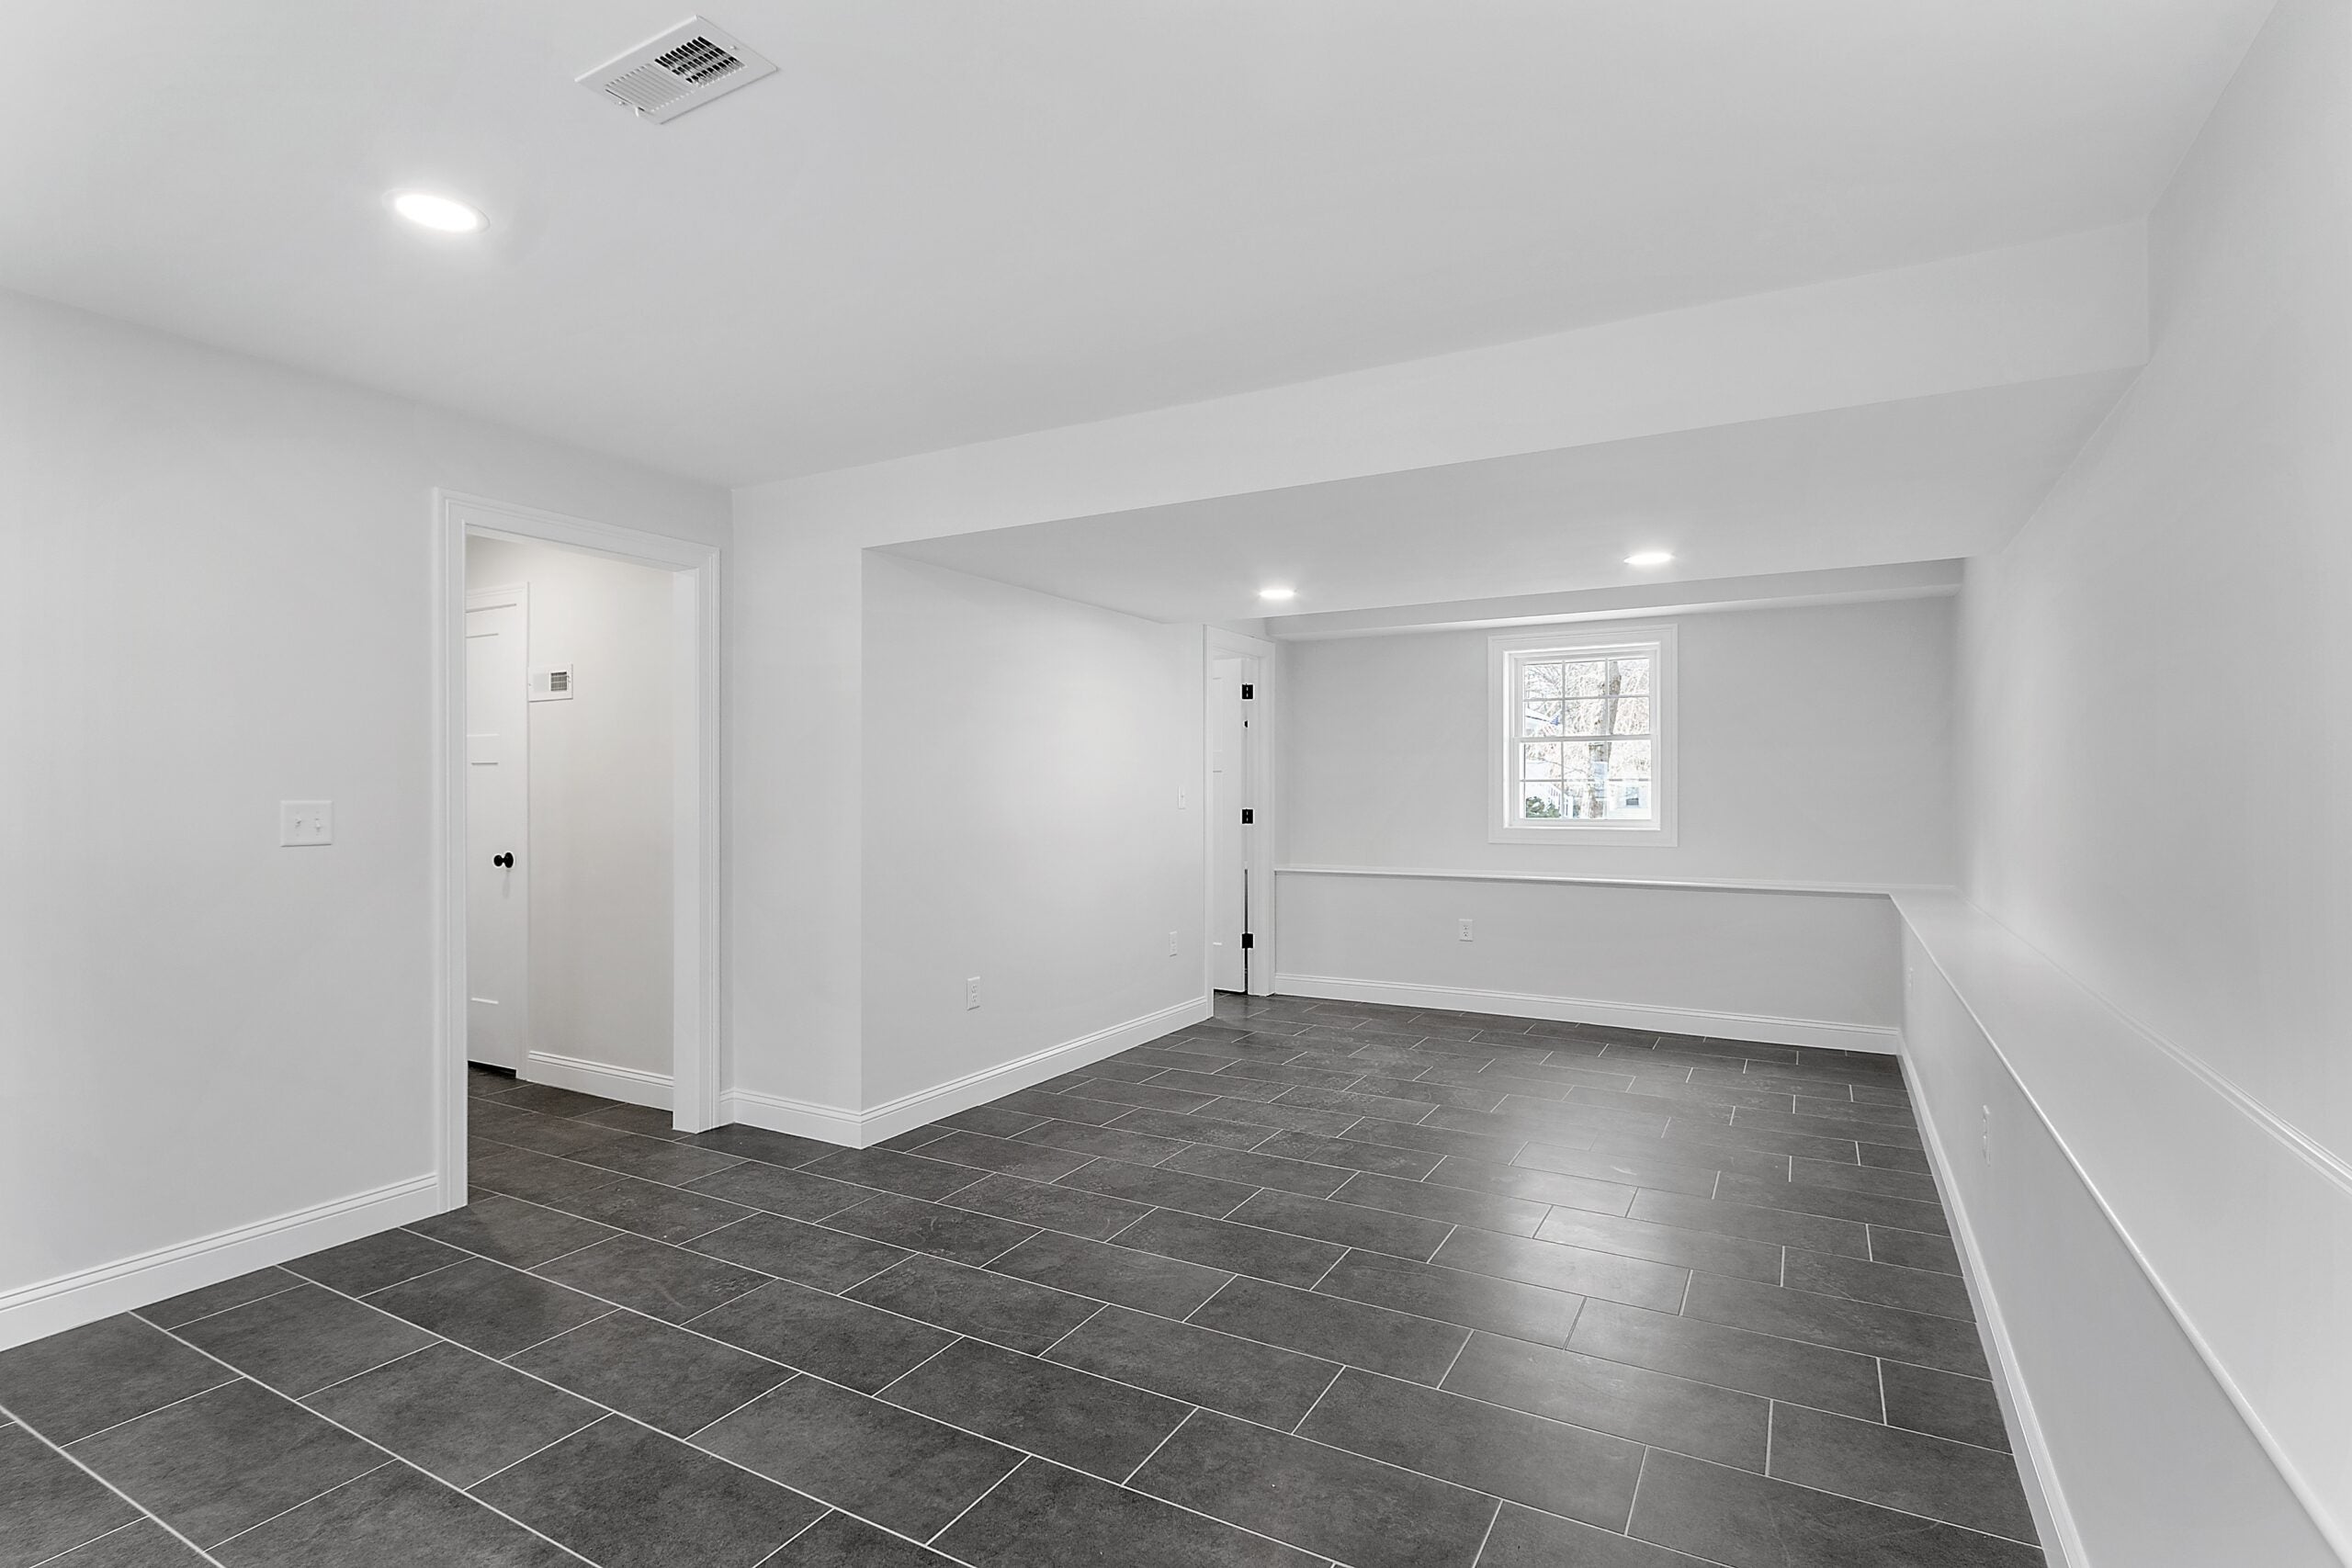 A room with a small window, chair rail molding, wide gray porcelain tile flooring, recessed lighting, and white walls.